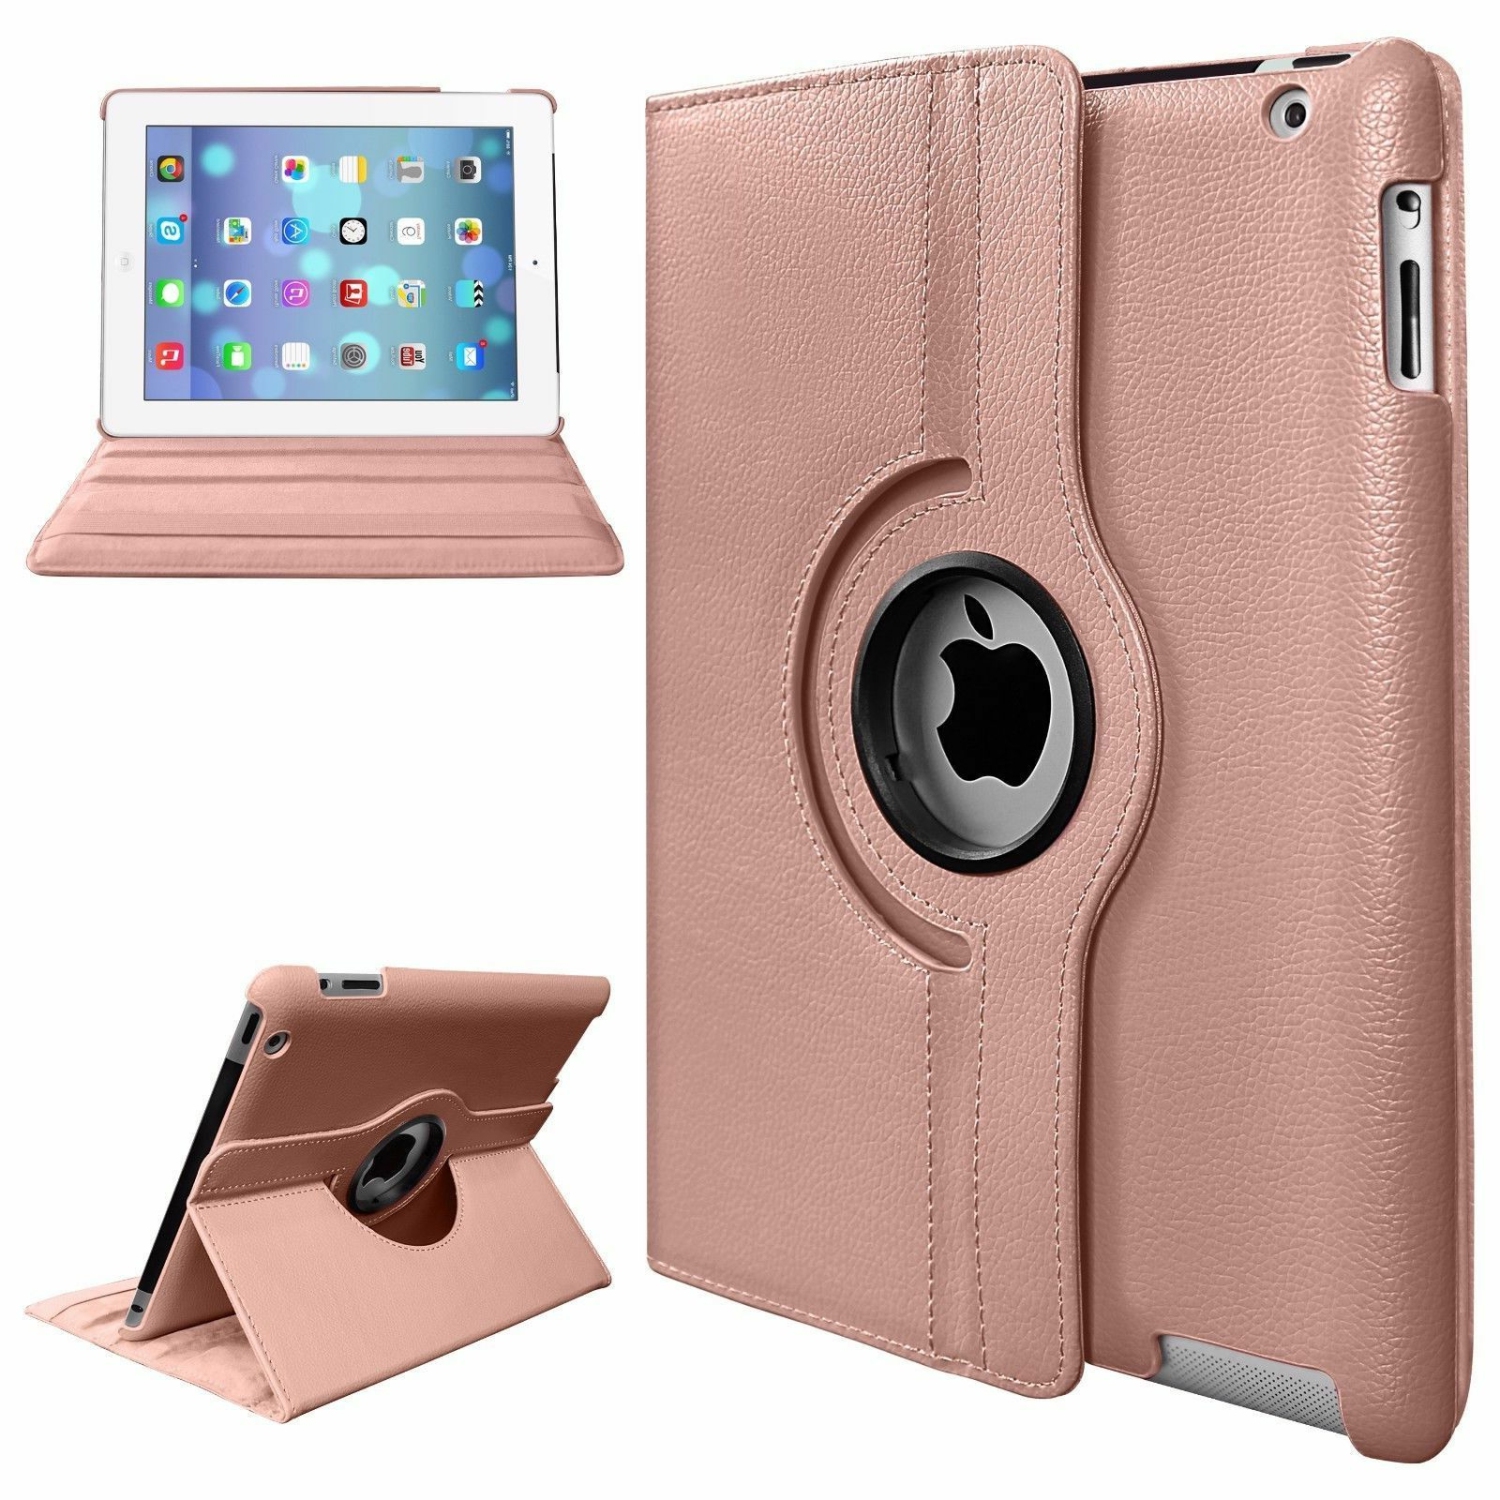 【CSmart】 360 Rotating PU Leather Stand Case Smart Cover for iPad Air 1 2 1st 2nd Gen, Rose Gold